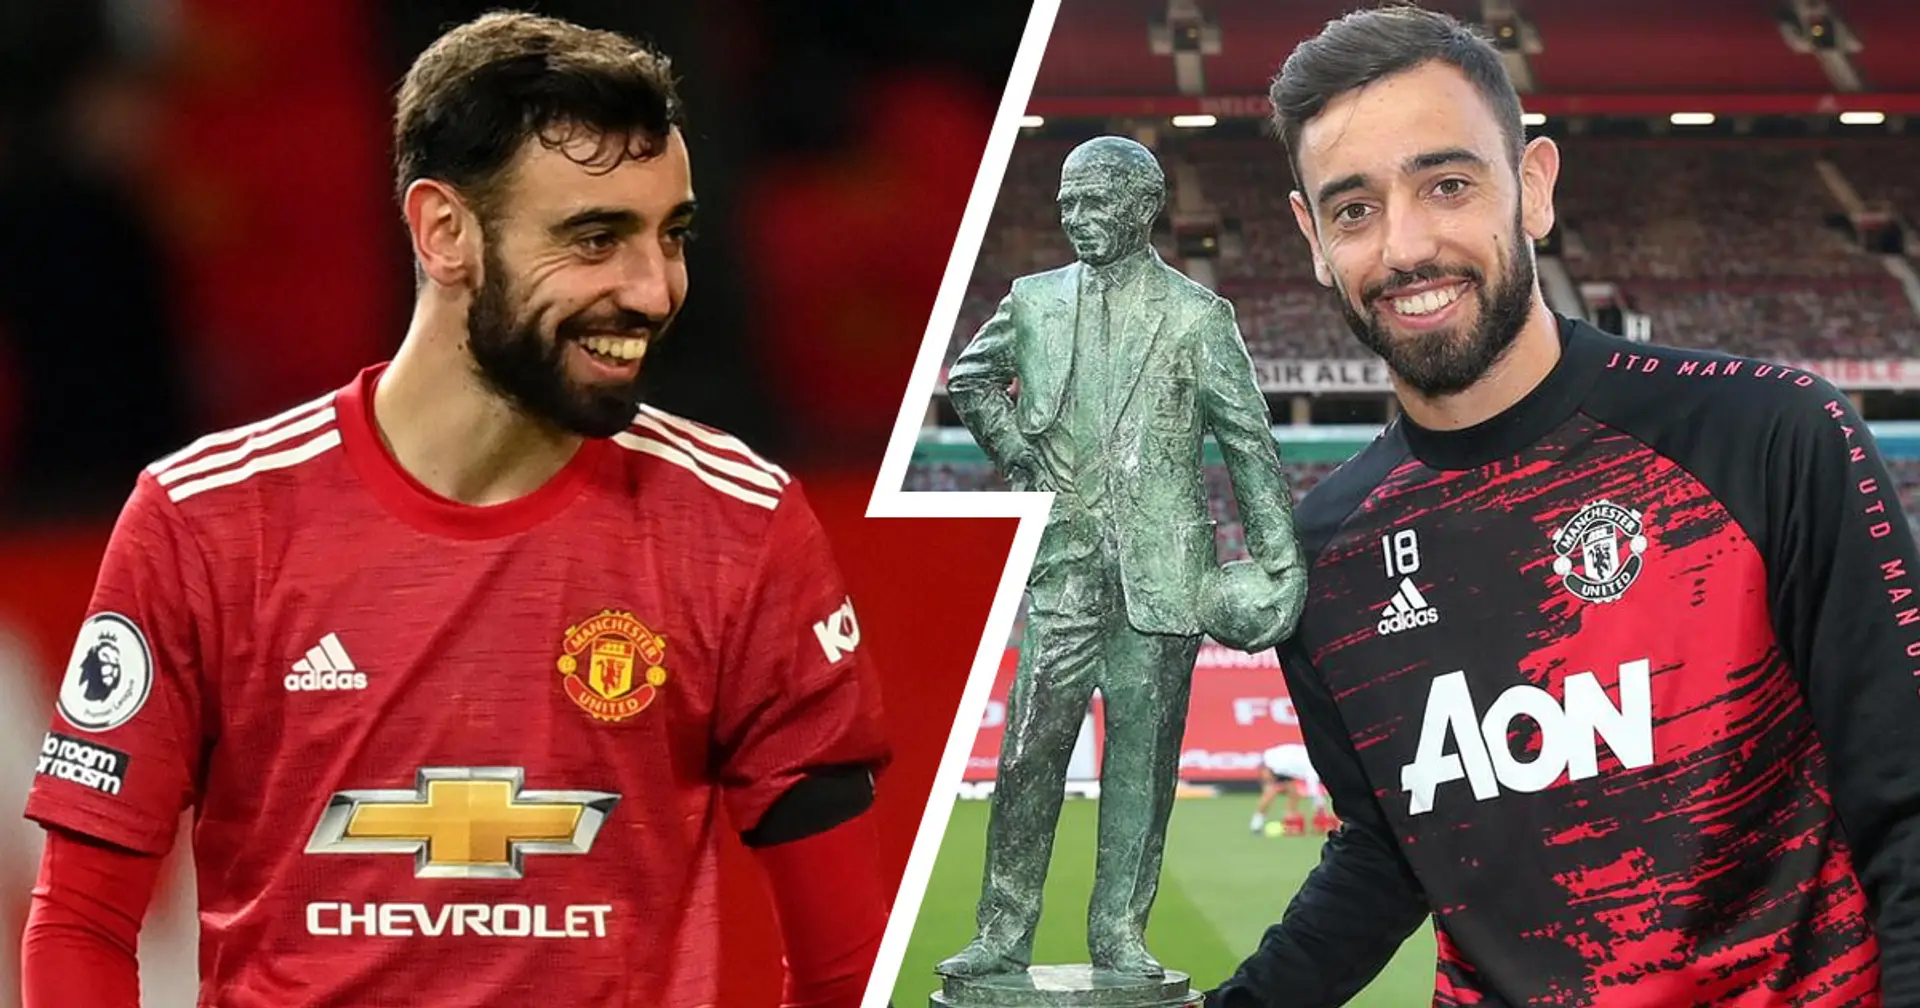 OFFICIAL: Bruno wins Sir Matt Busby Player of the Year award for second consecutive campaign